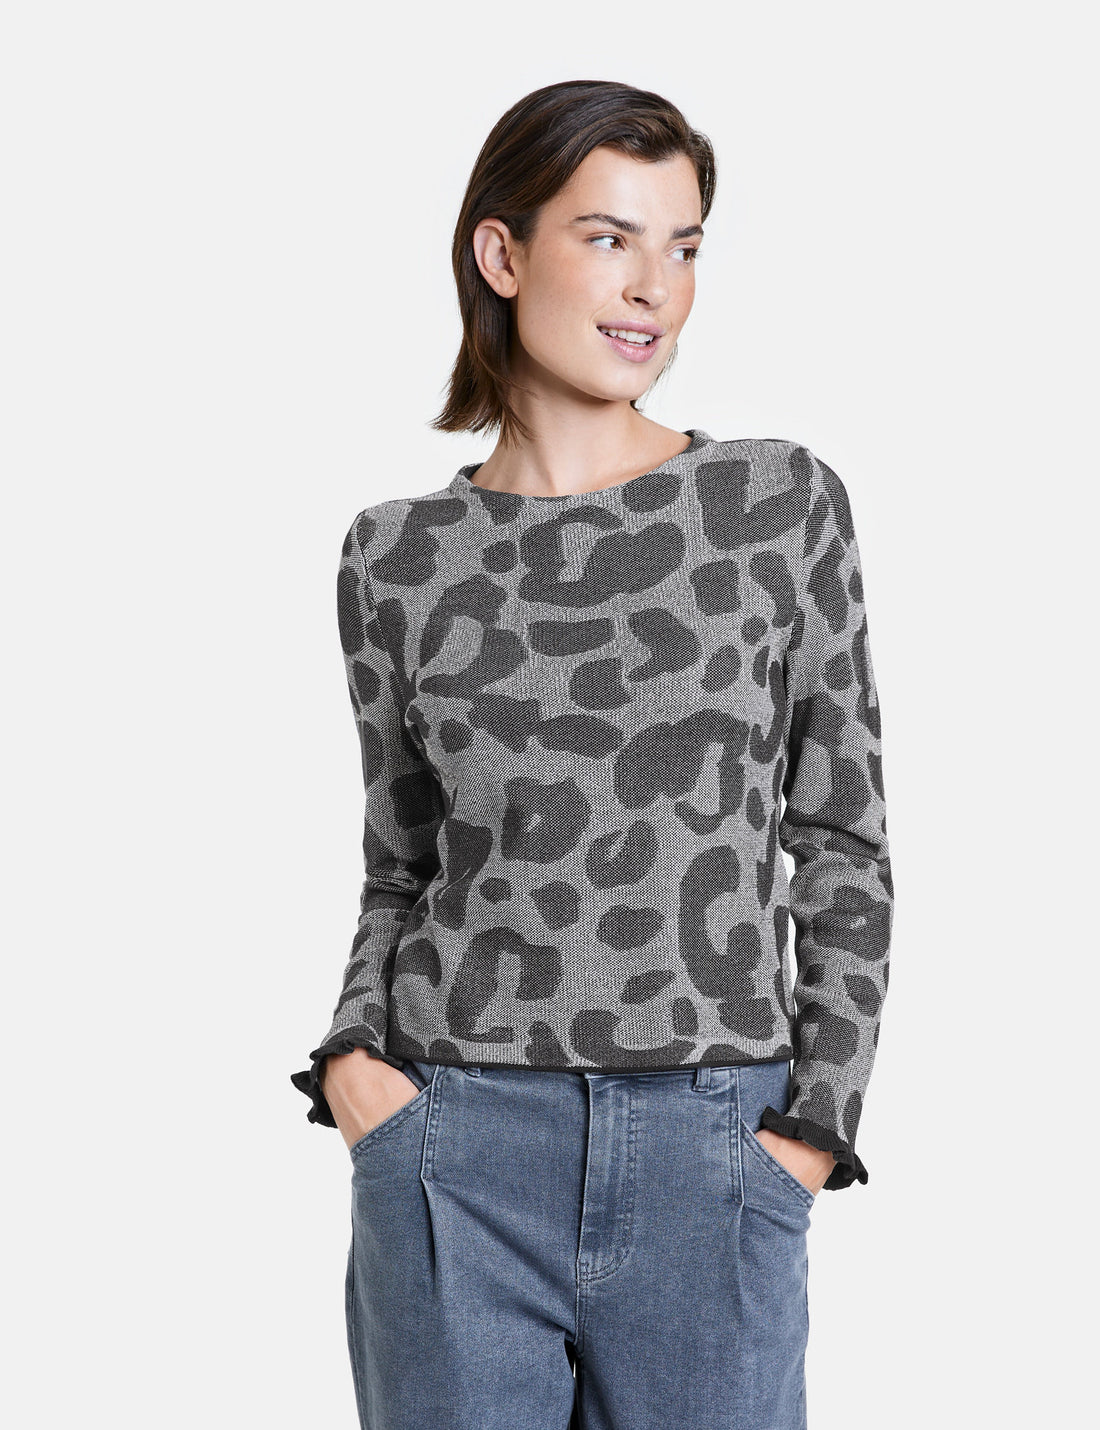 Jumper With A Leopard Pattern_472404-15305_2202_01